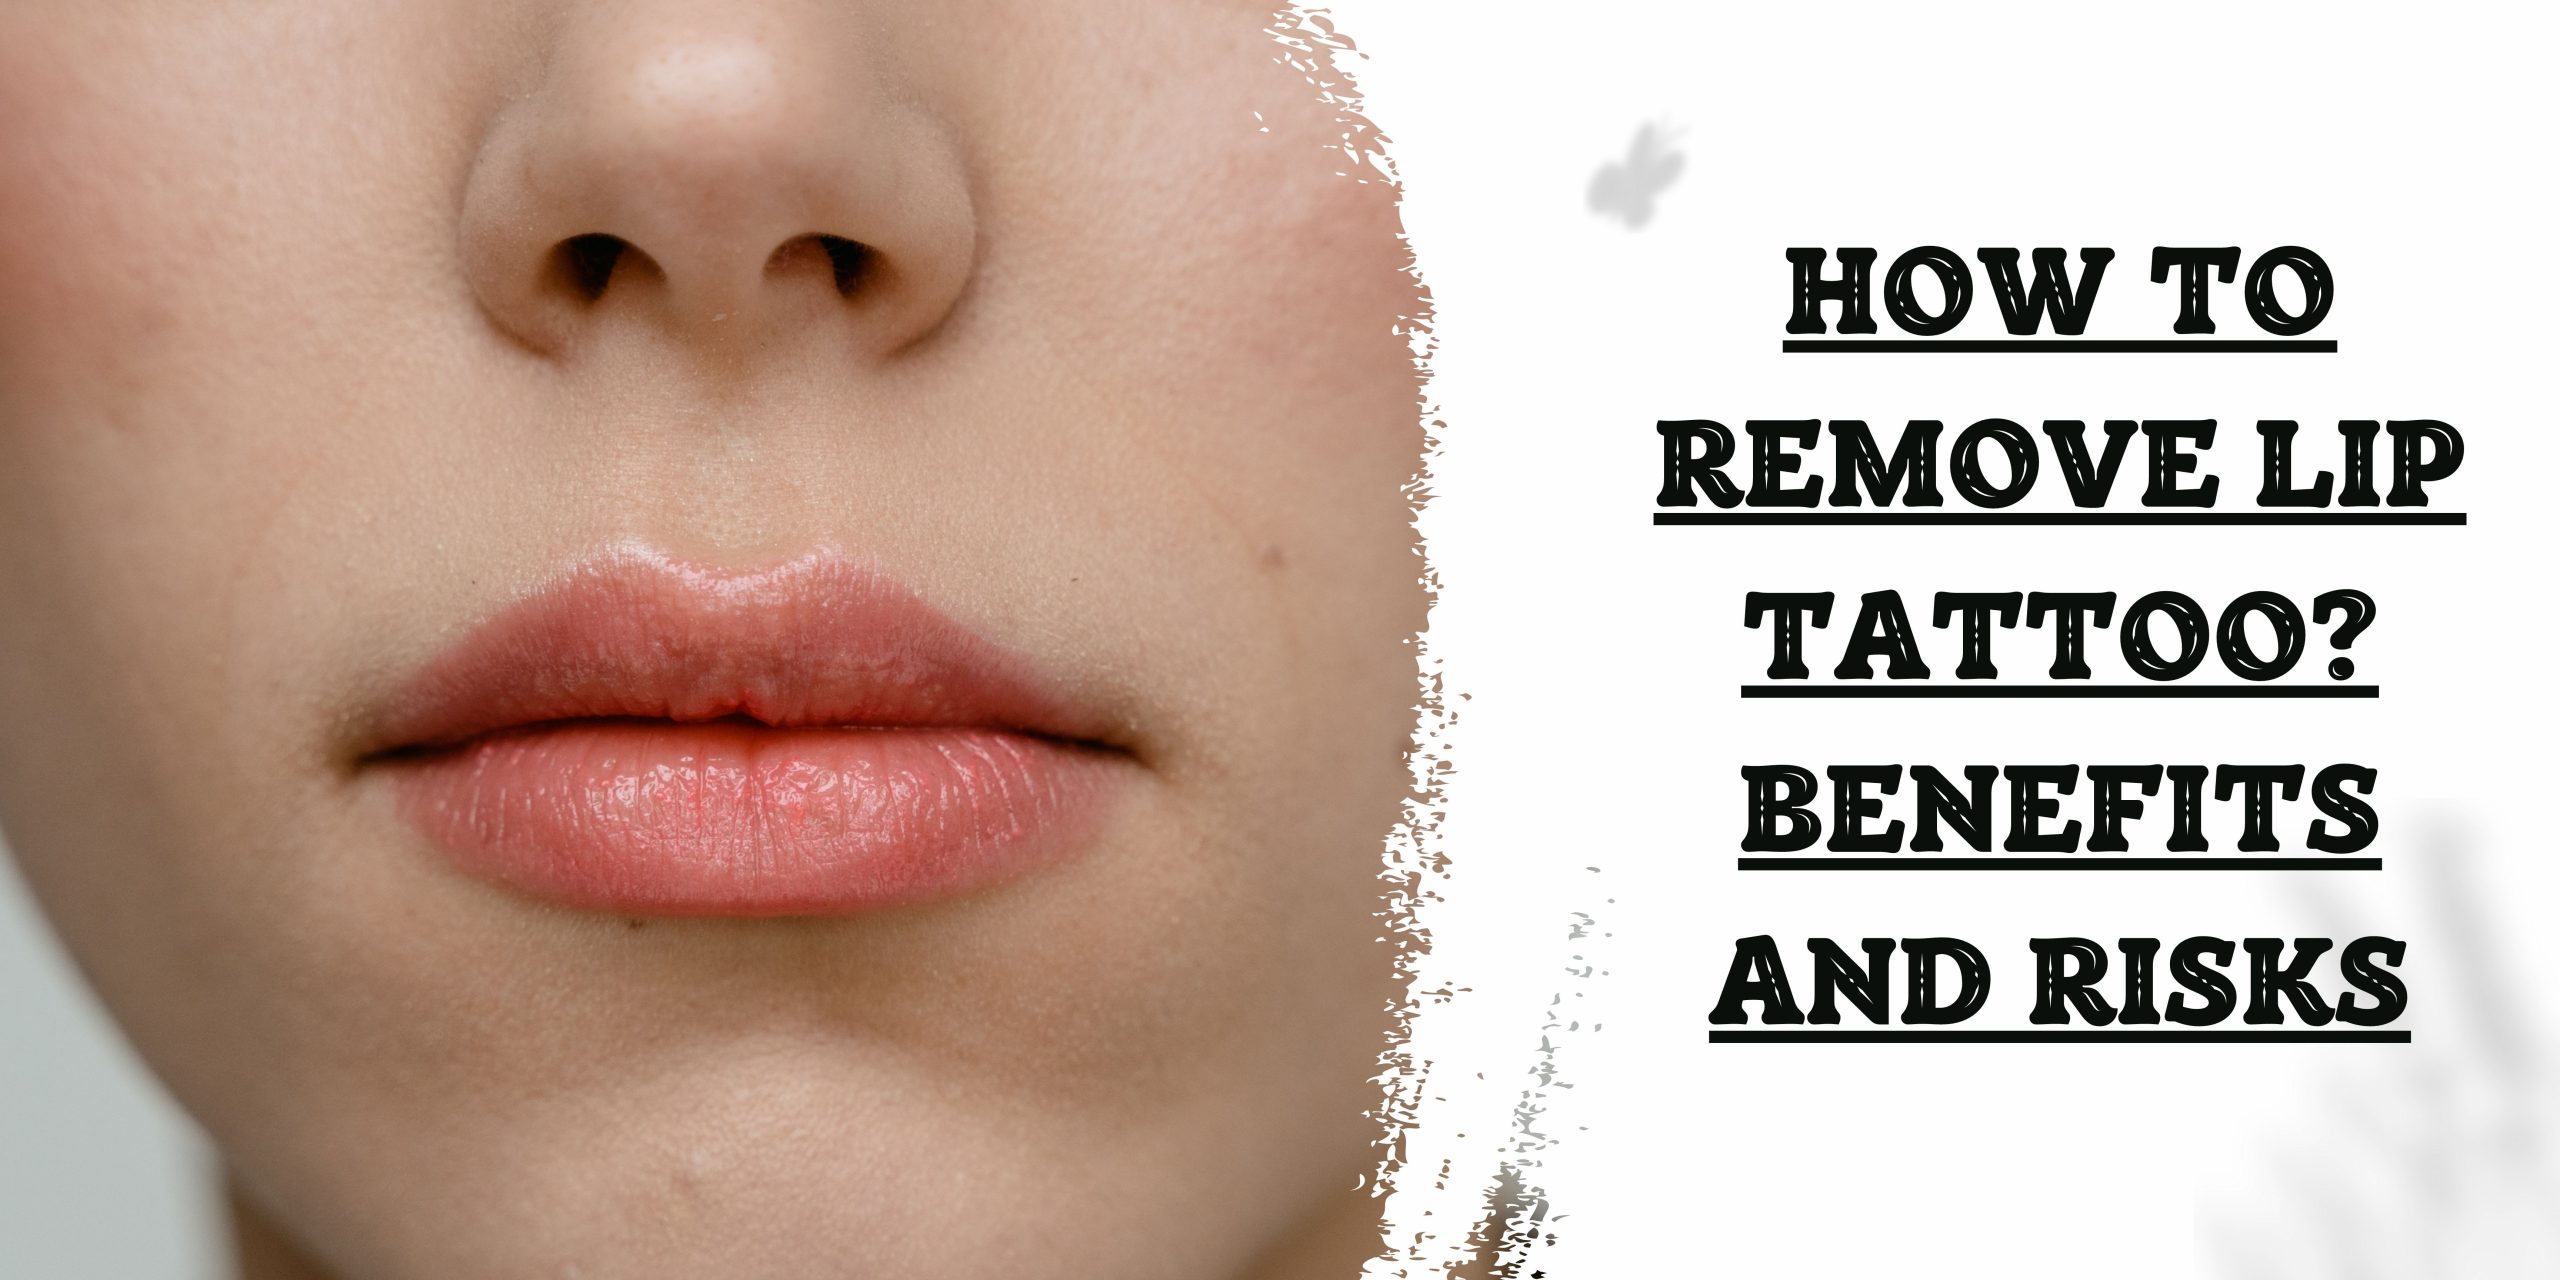 How to remove lip tattoo